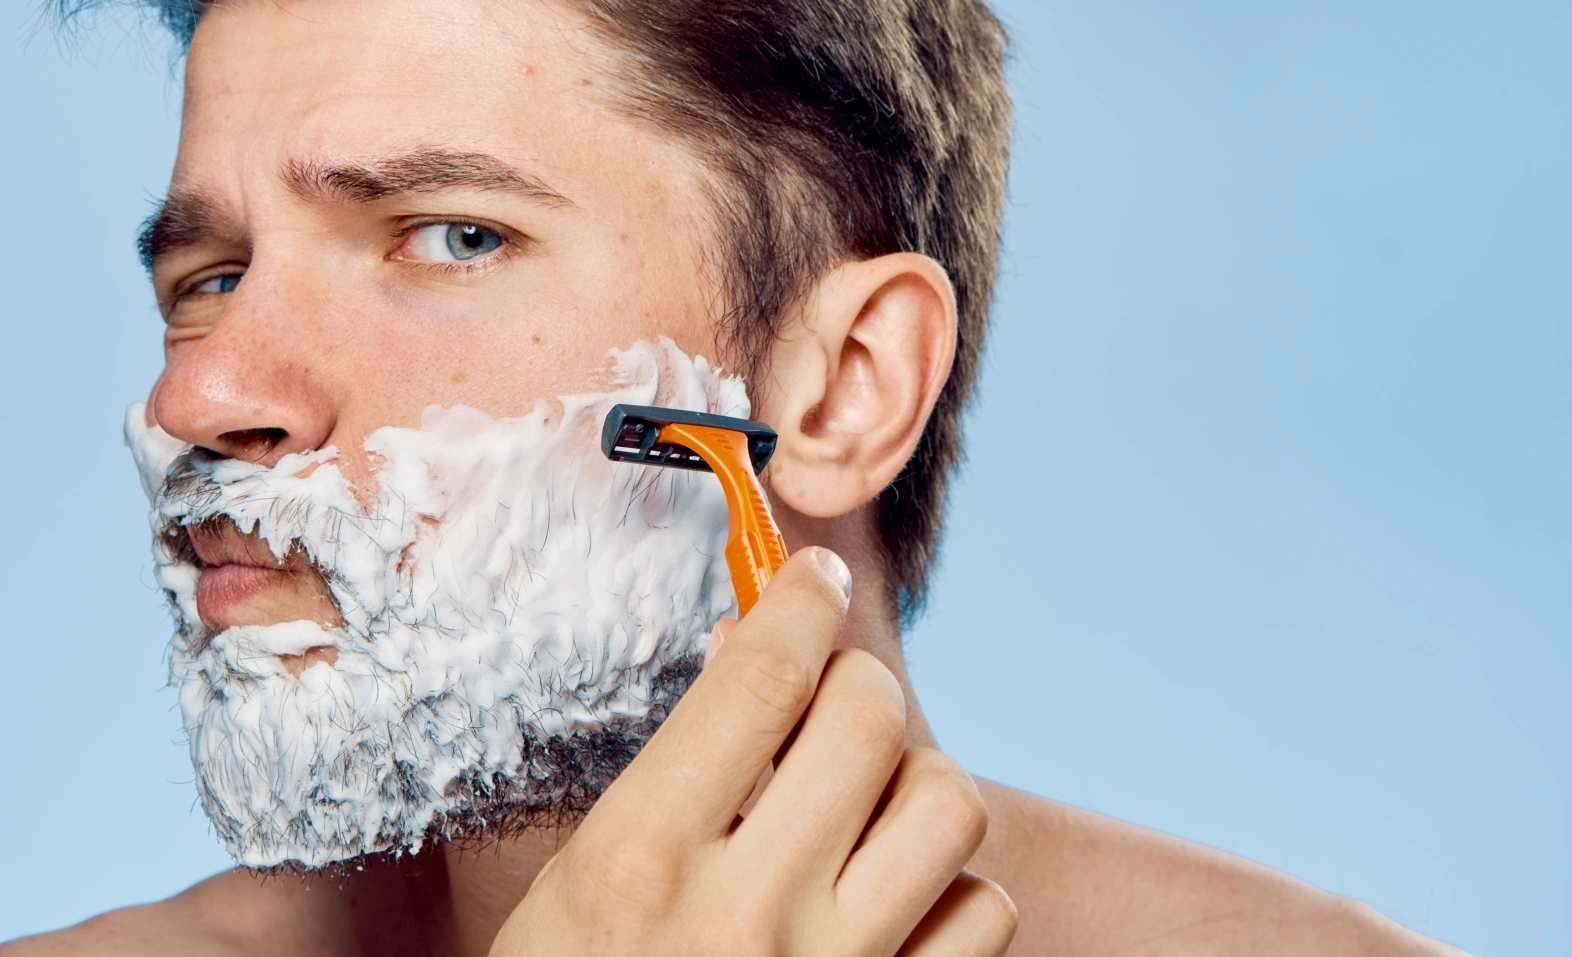 You should change your razor based on their lifespan to ensure maximal comfort while shaving